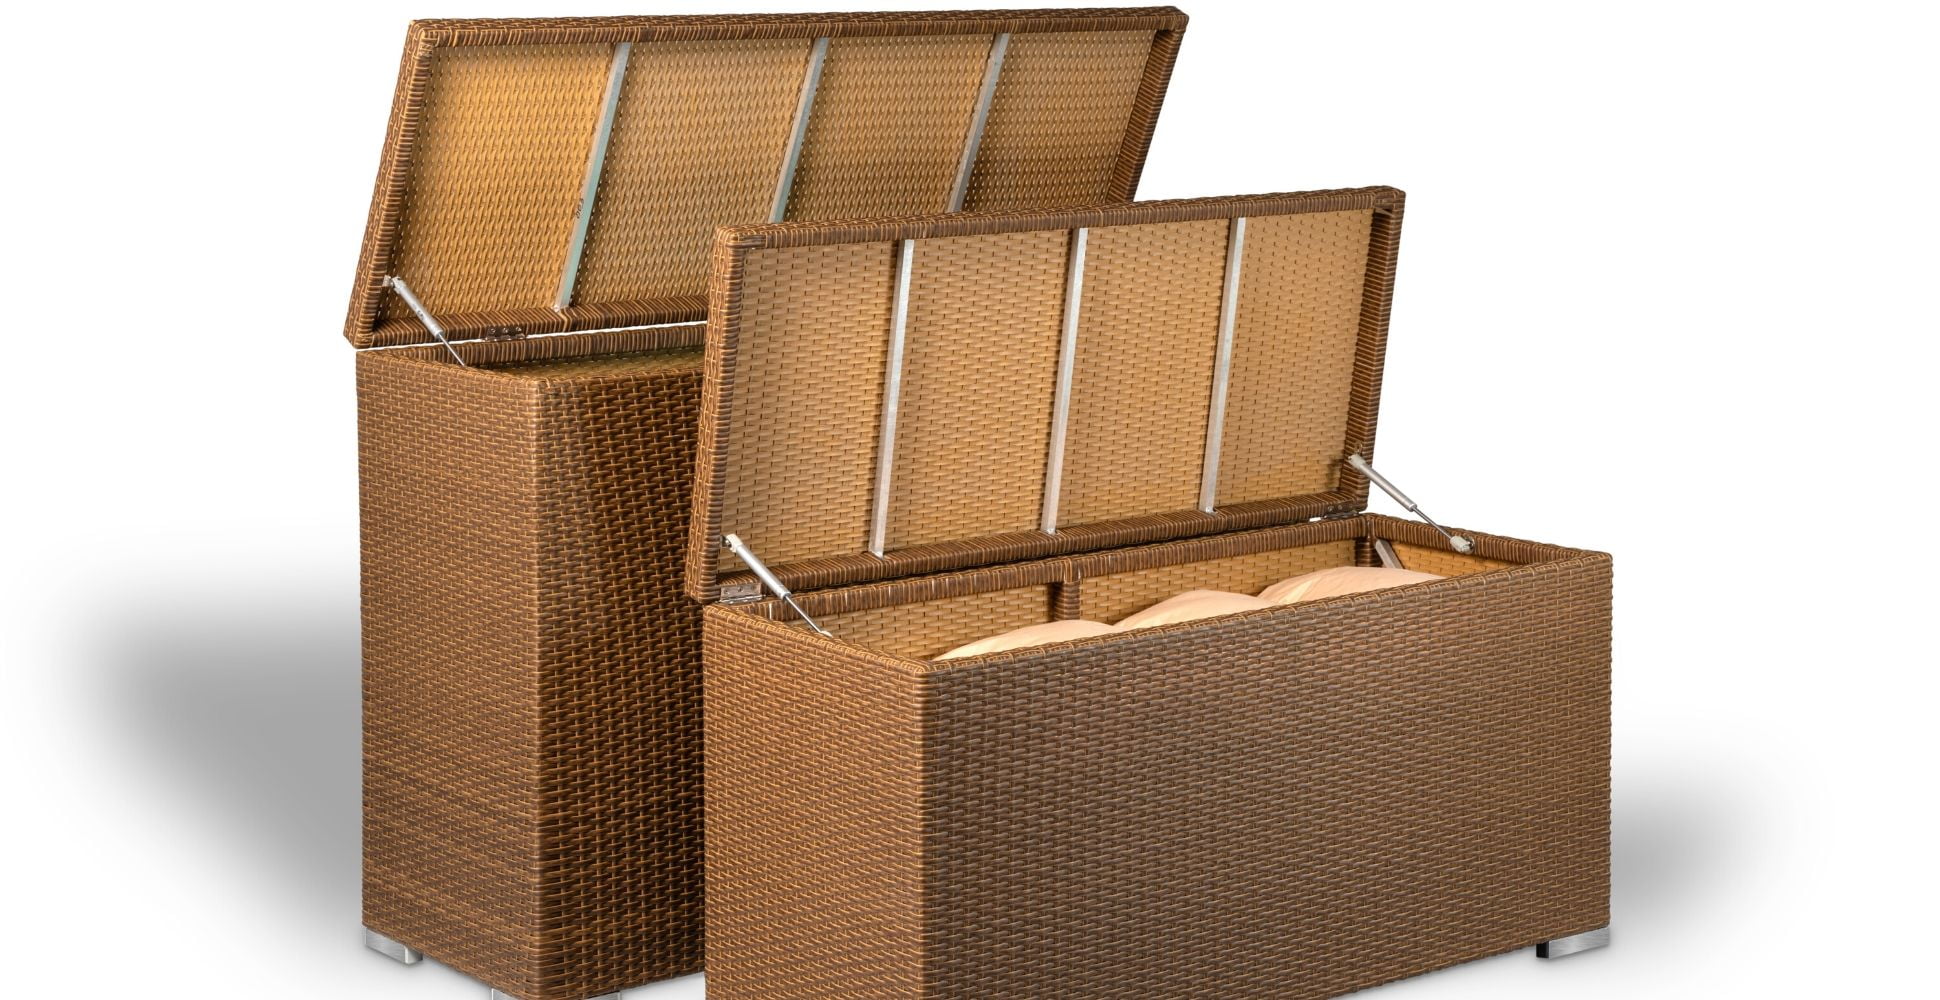 5 Best Outdoor Rattan Storage Boxes Uk (2021 Review)